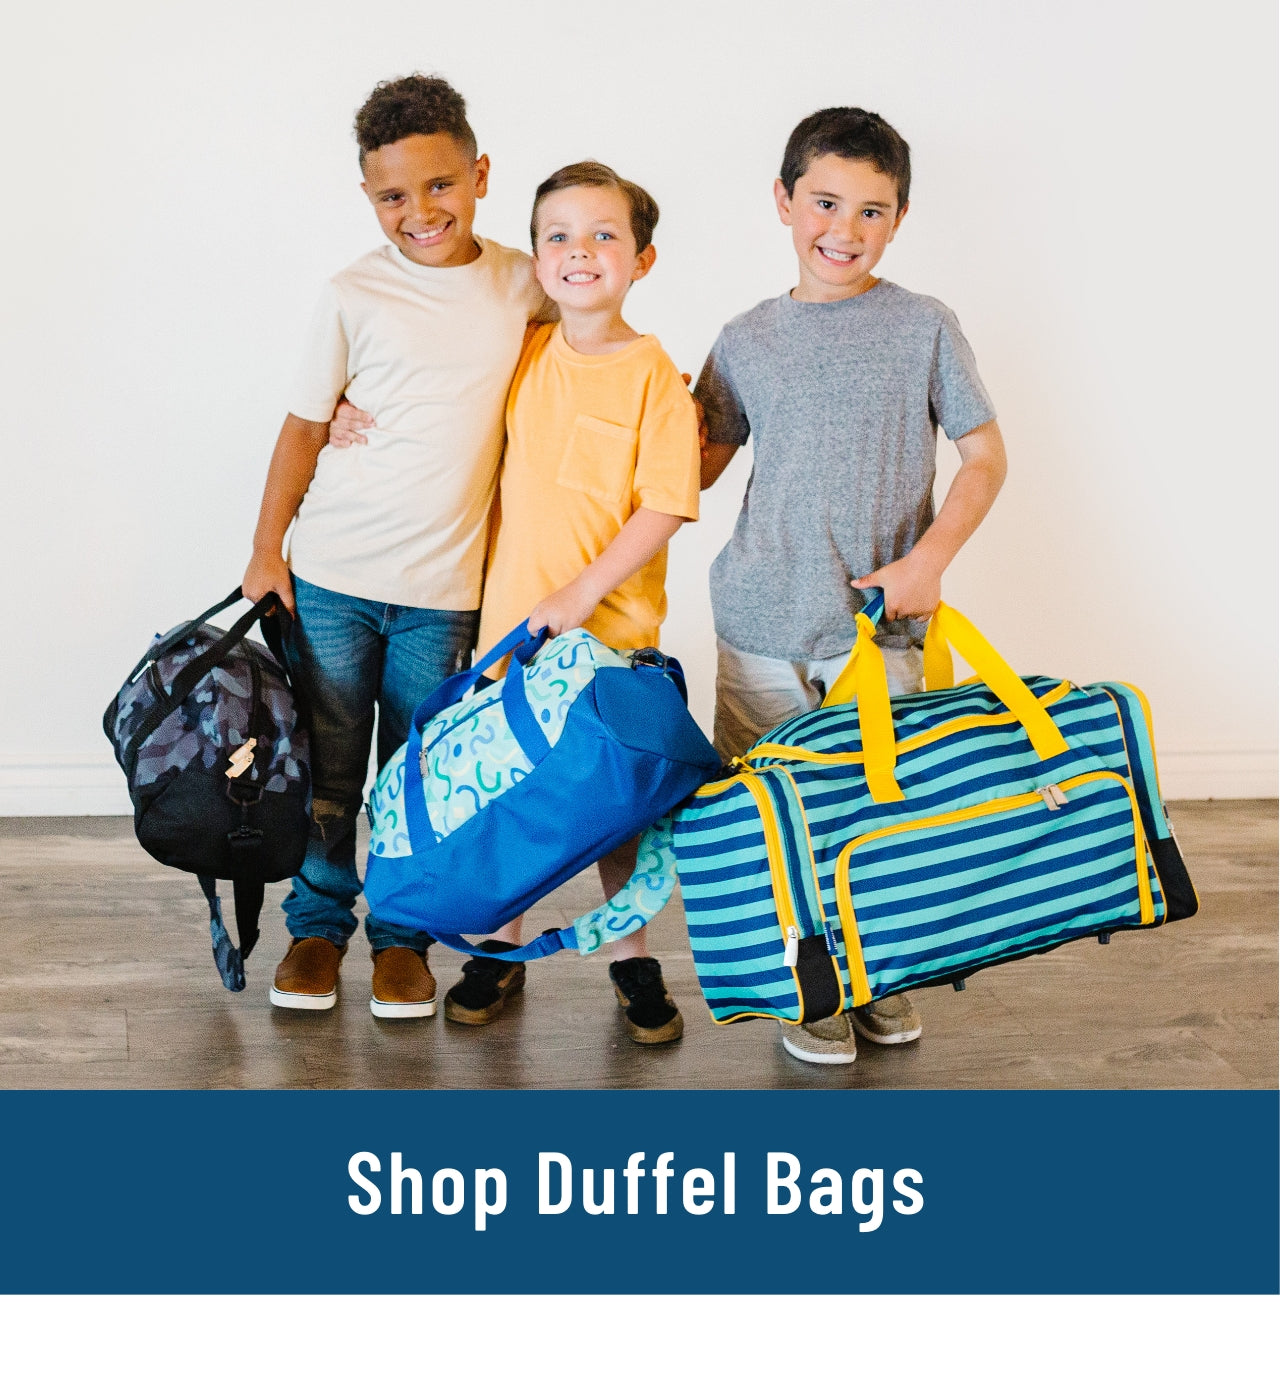 Image of 3 boys standing and holding 3 duffel bags with the patterns Black Camo, Confetti Blue, and Blue Stripes. Link to shop Duffel Bags